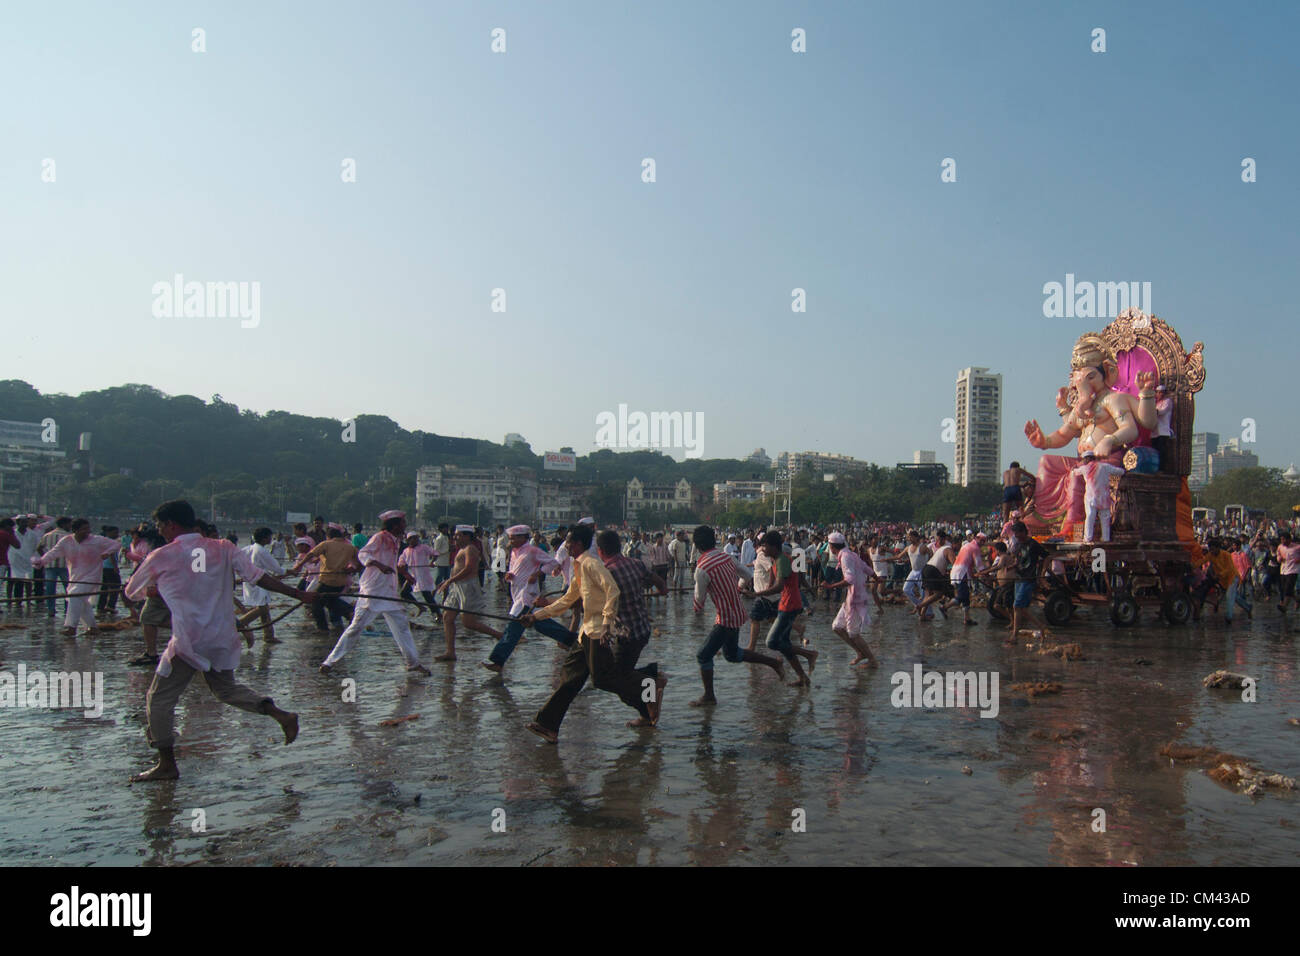 Mumbai, India. Indian Hindu devotees carry around a huge idol of the elephant-headed Hindu god Lord Ganesha on the beach for immersion of the idol into the Arabian Sea of Mumbai on September 29, 2012. People celebrate Ganpati (rebirth) of Lord Ganesh the Elephant God. Lasting for 10days, this custom culminates with the ritual emersion of Ganesh idols in local rivers and lakes. Stock Photo